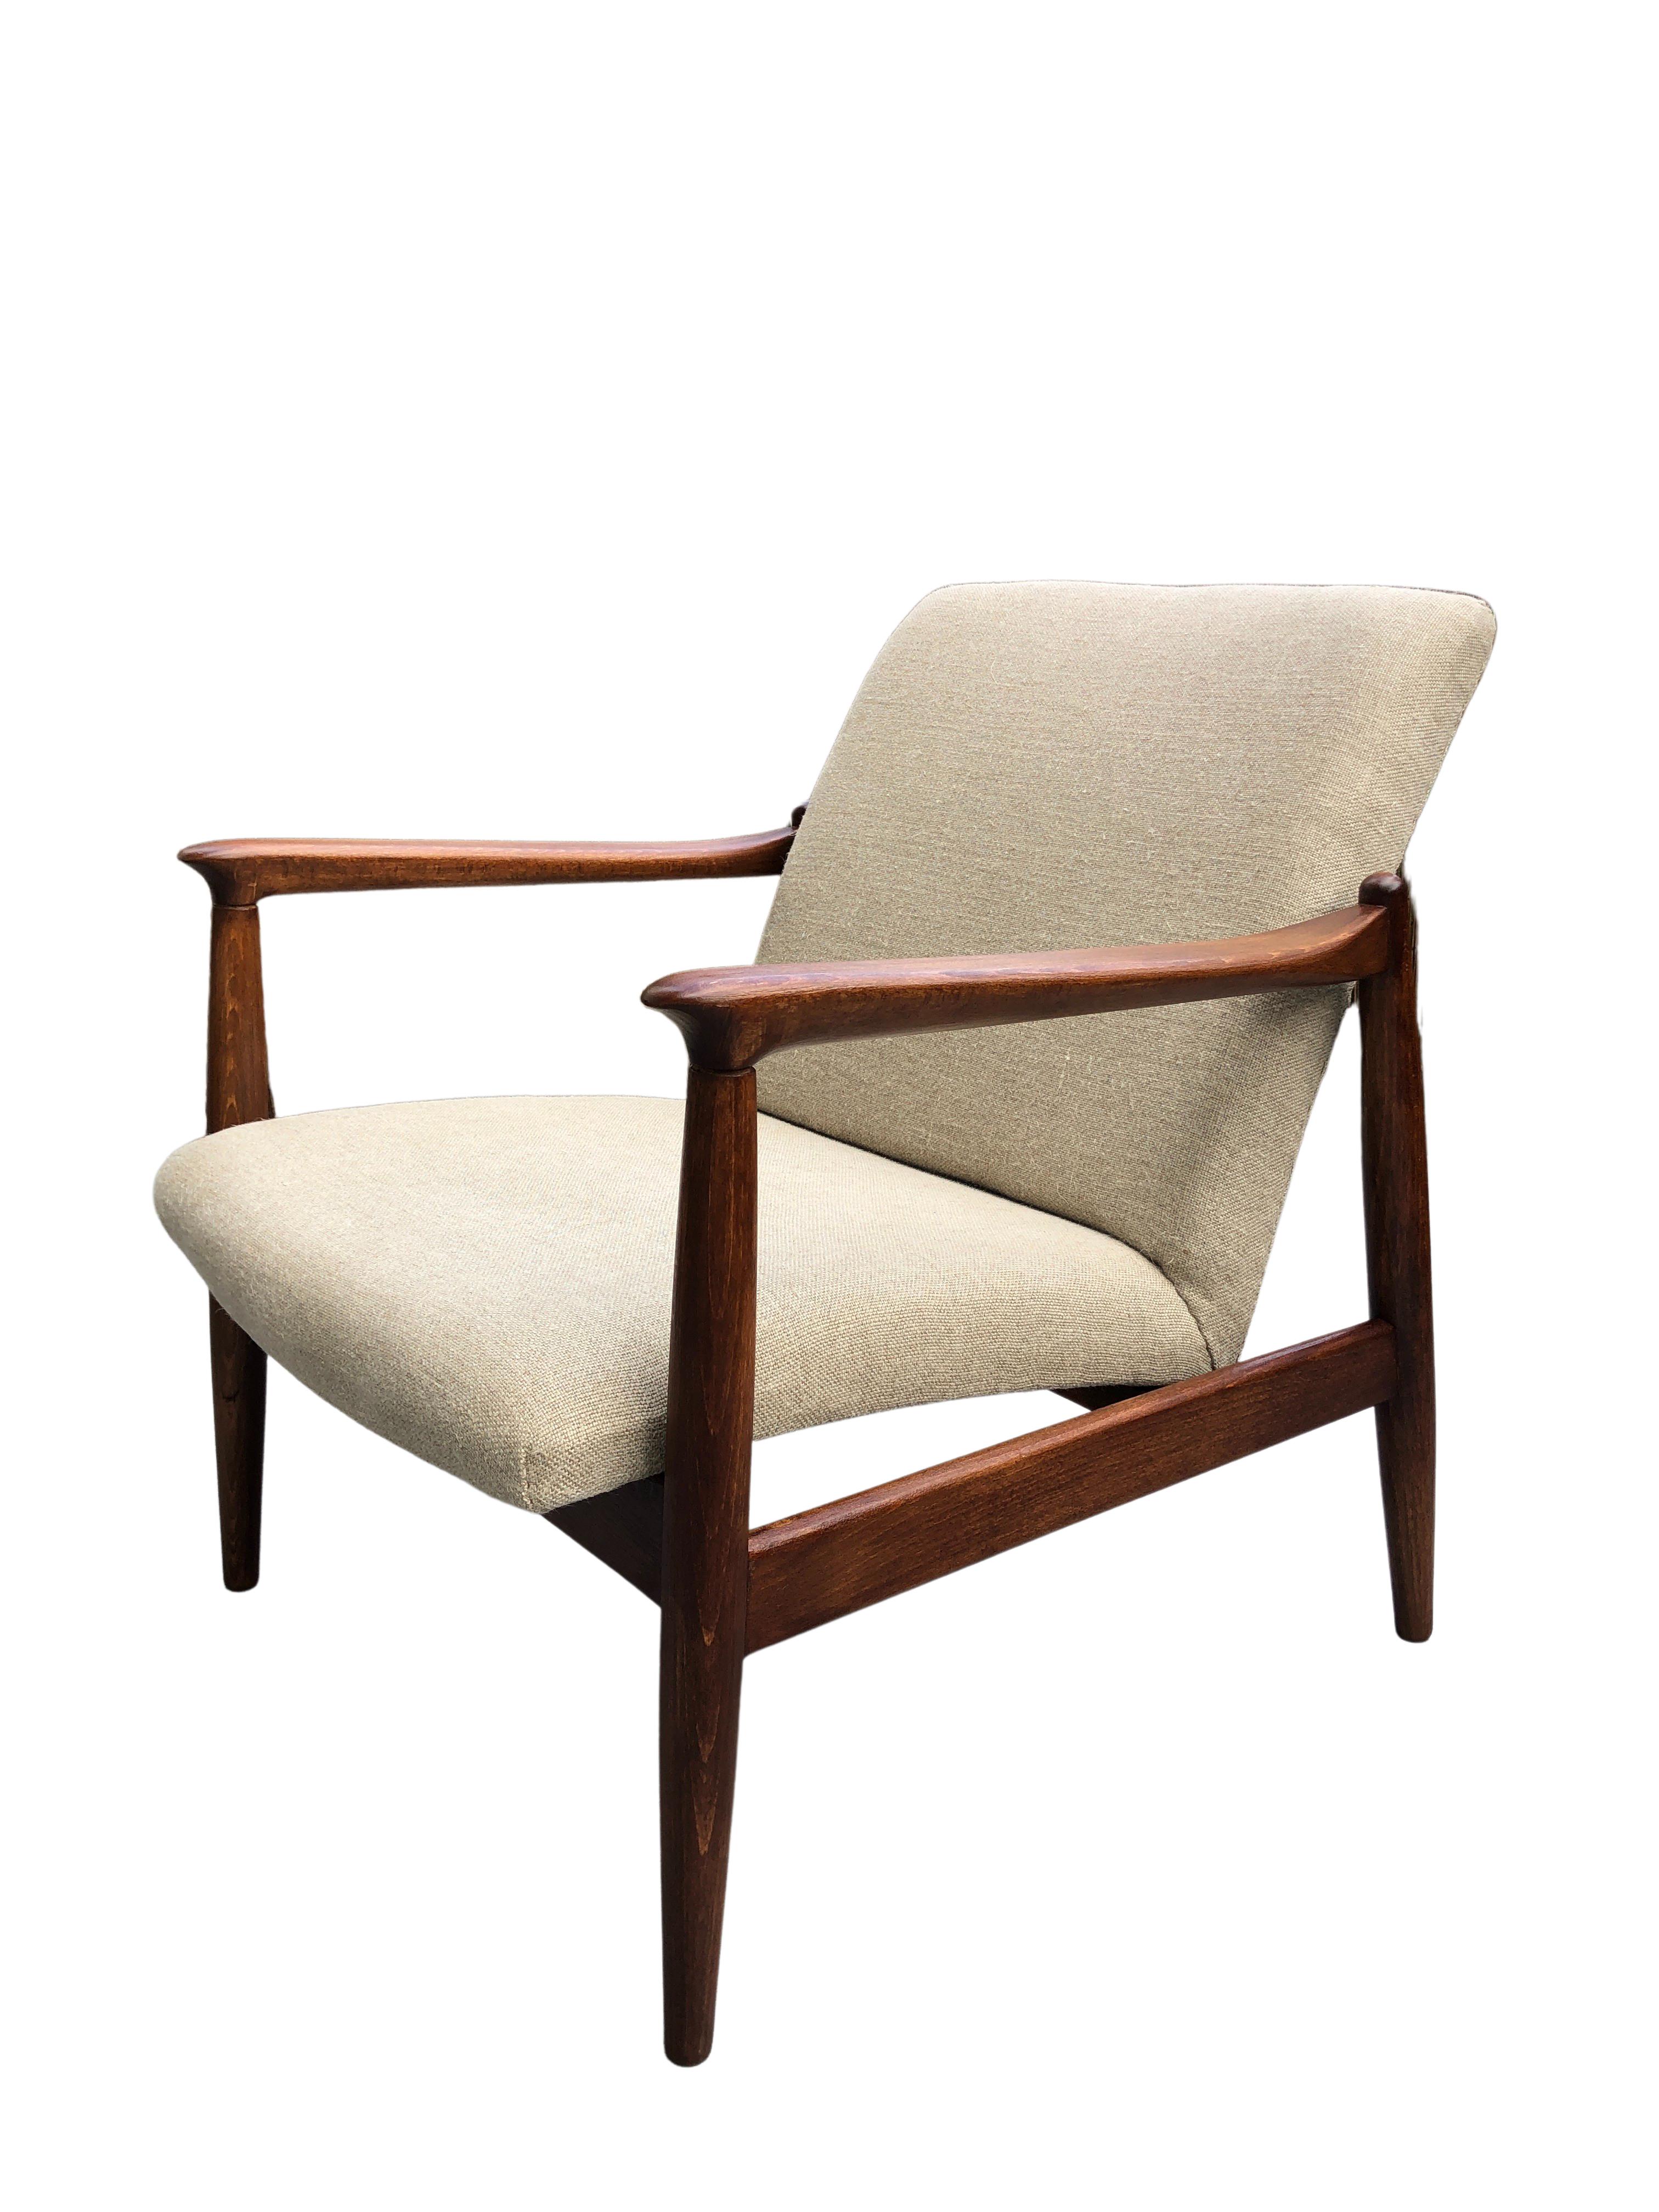 One of the icon of Polish mid-century design model GFM-64 armchair, designed by Edmund Homa, manufactured by Goscinska Furniture Factory in Poland in the 1960s. 
The structure is made of solid beechwood in a warm wallnut color, finished with a semi